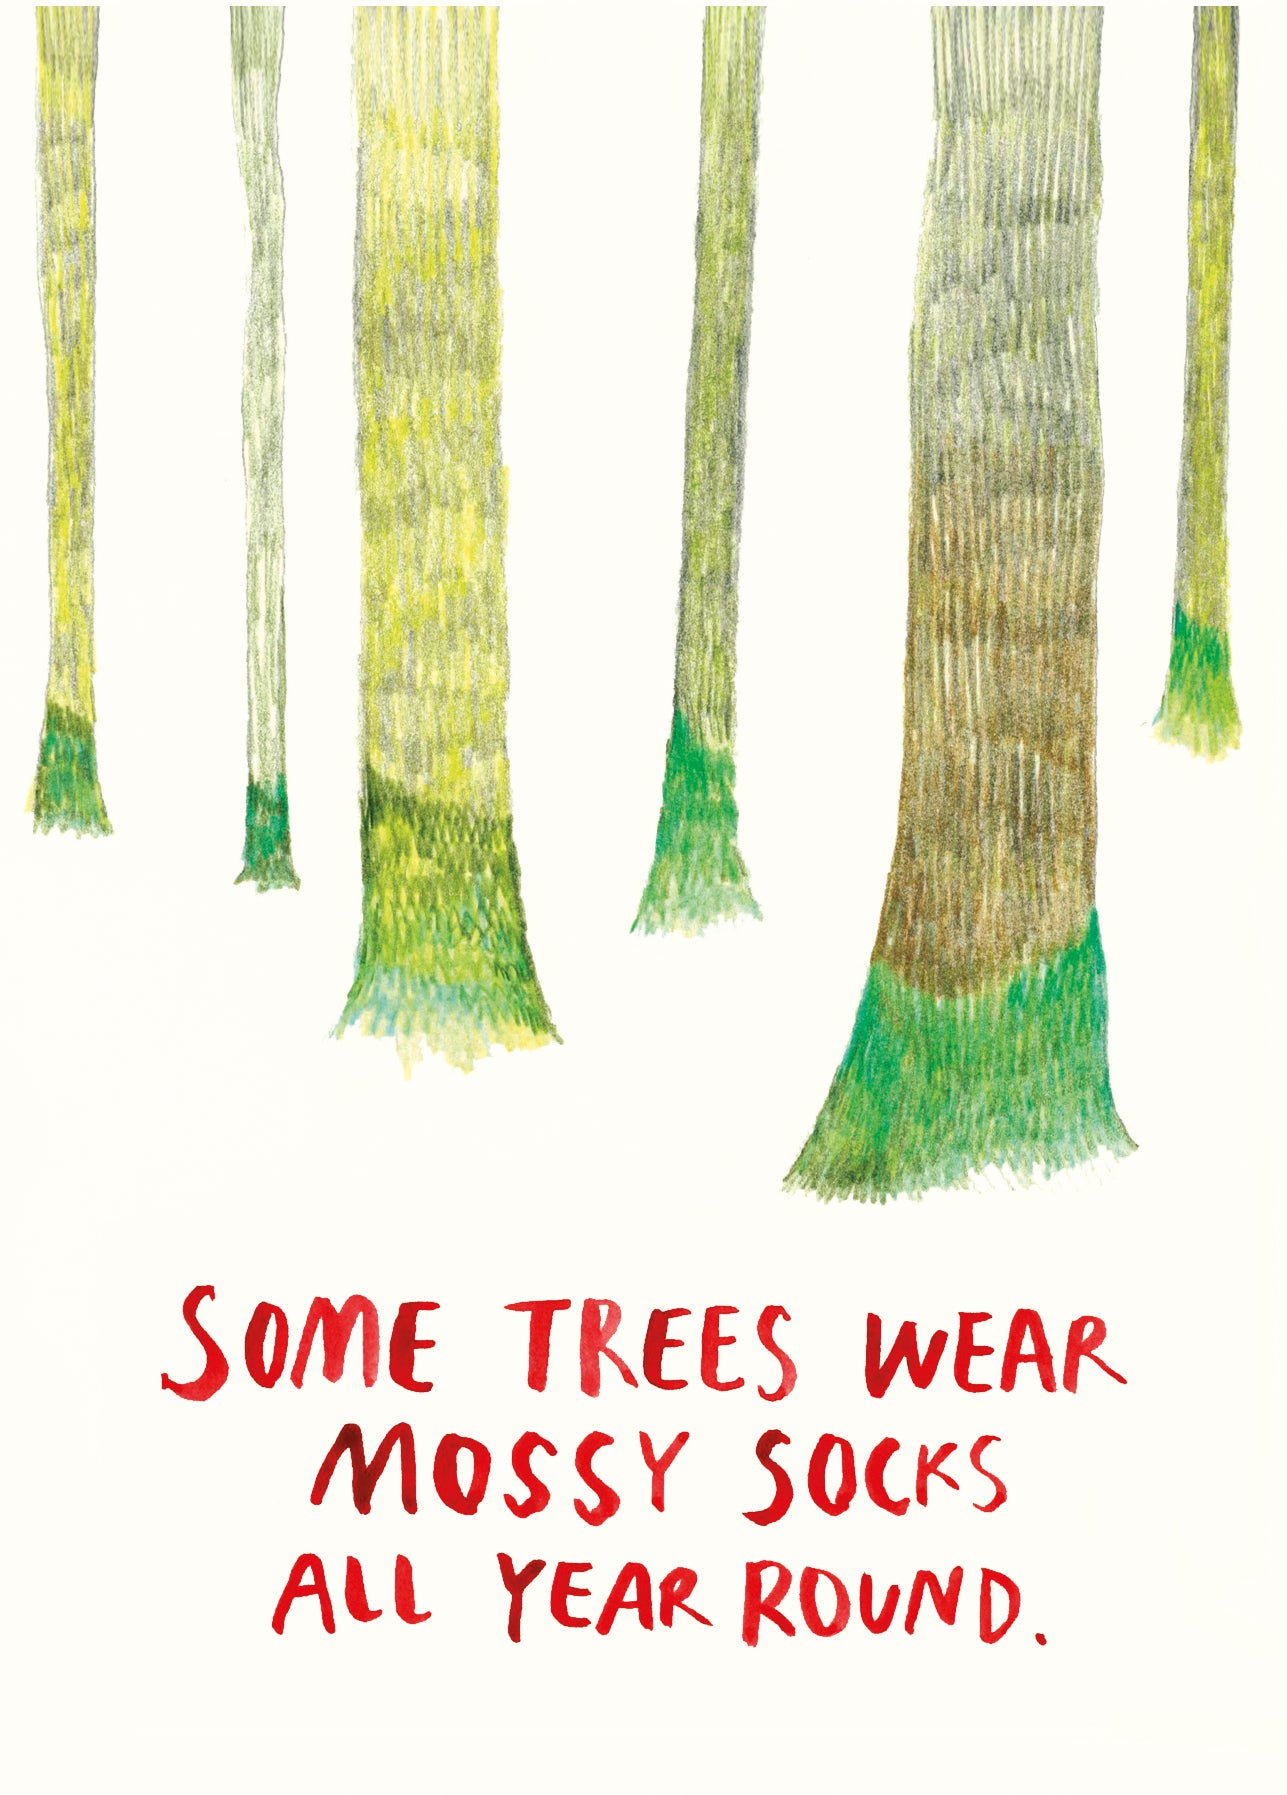 Some trees wear mossy socks all year round